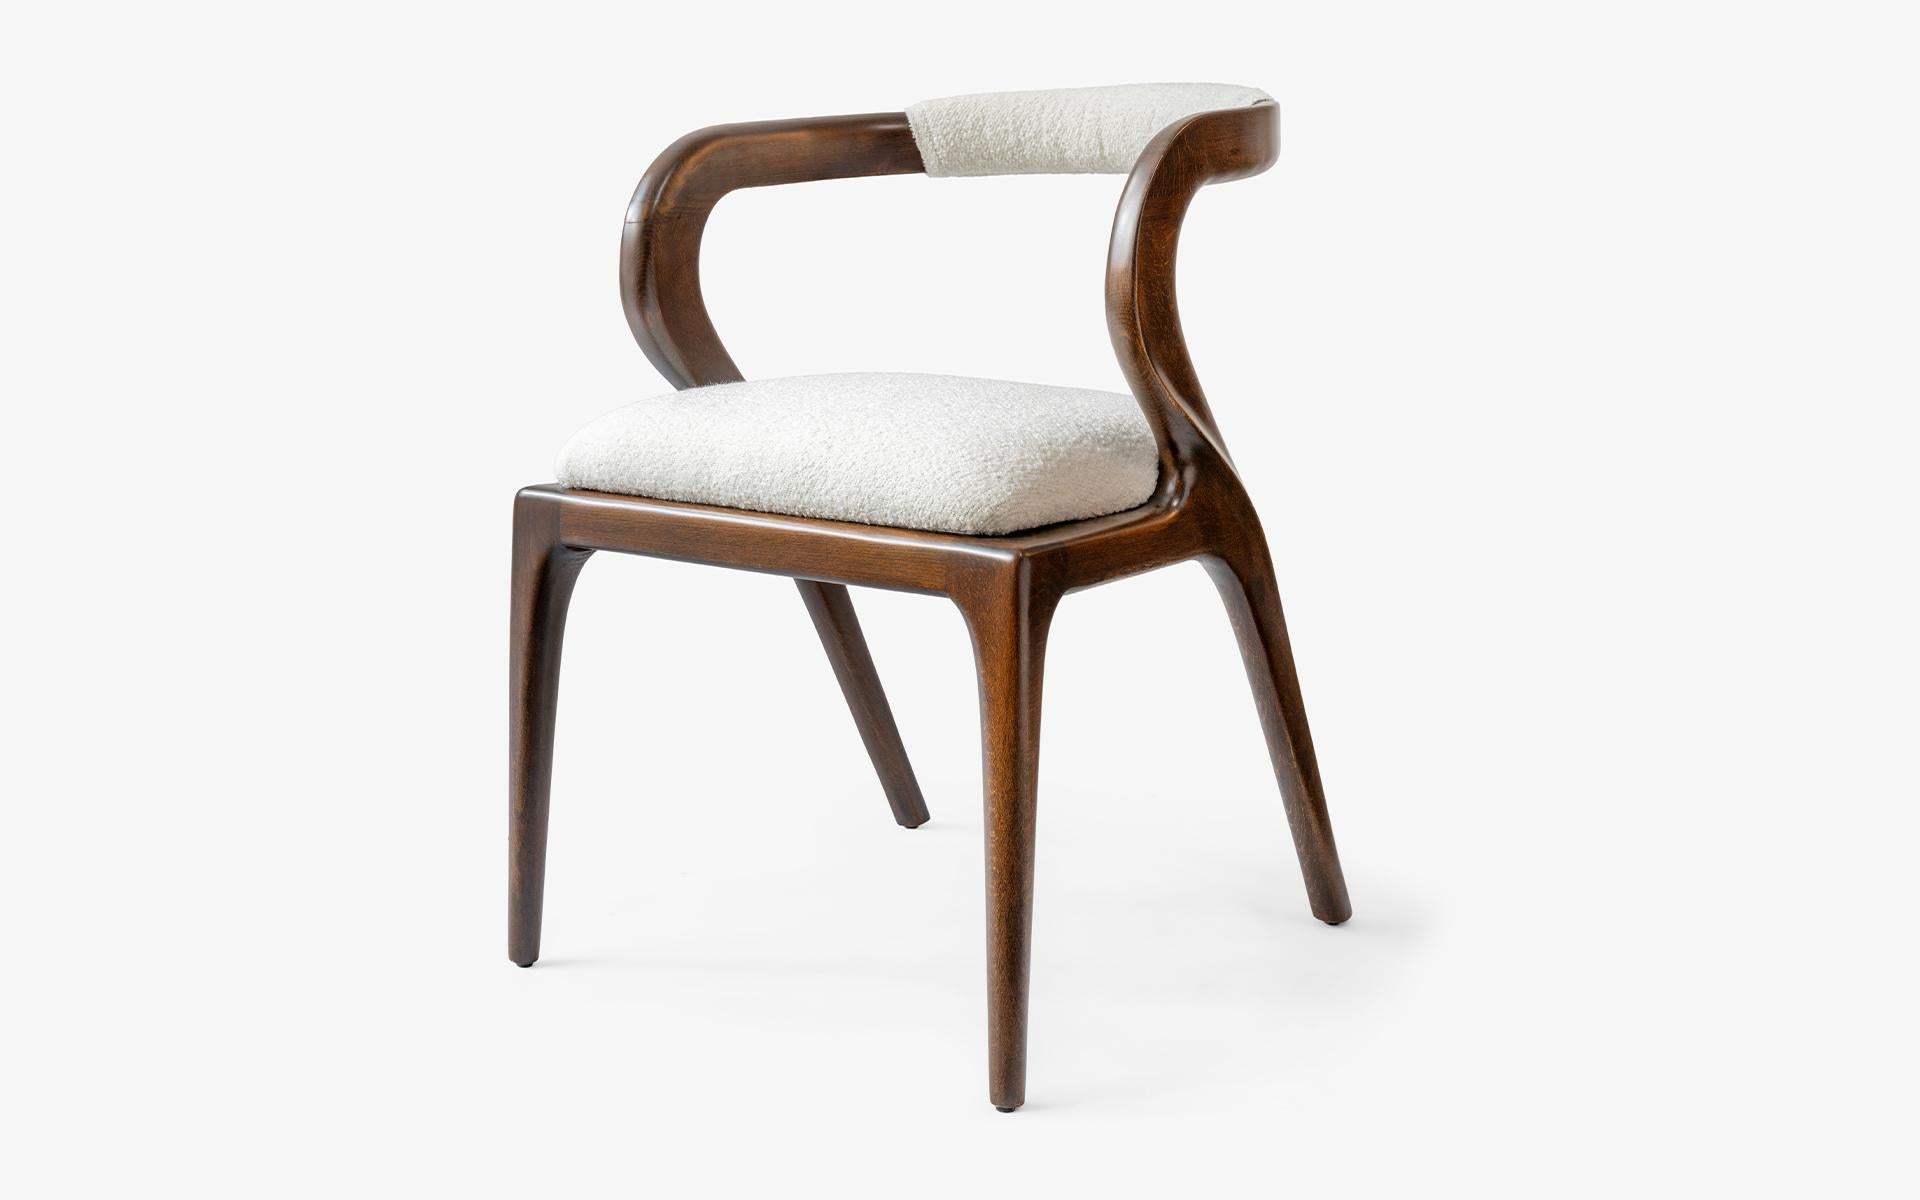 Lagu values and cherishes local production, bringing together the artisanal crafts of boutique producers and user-friendly quality designs in the 'Lagu Selection'.

The elegant piece of the Lagu Selection collection, Nana Chair, stands out with its